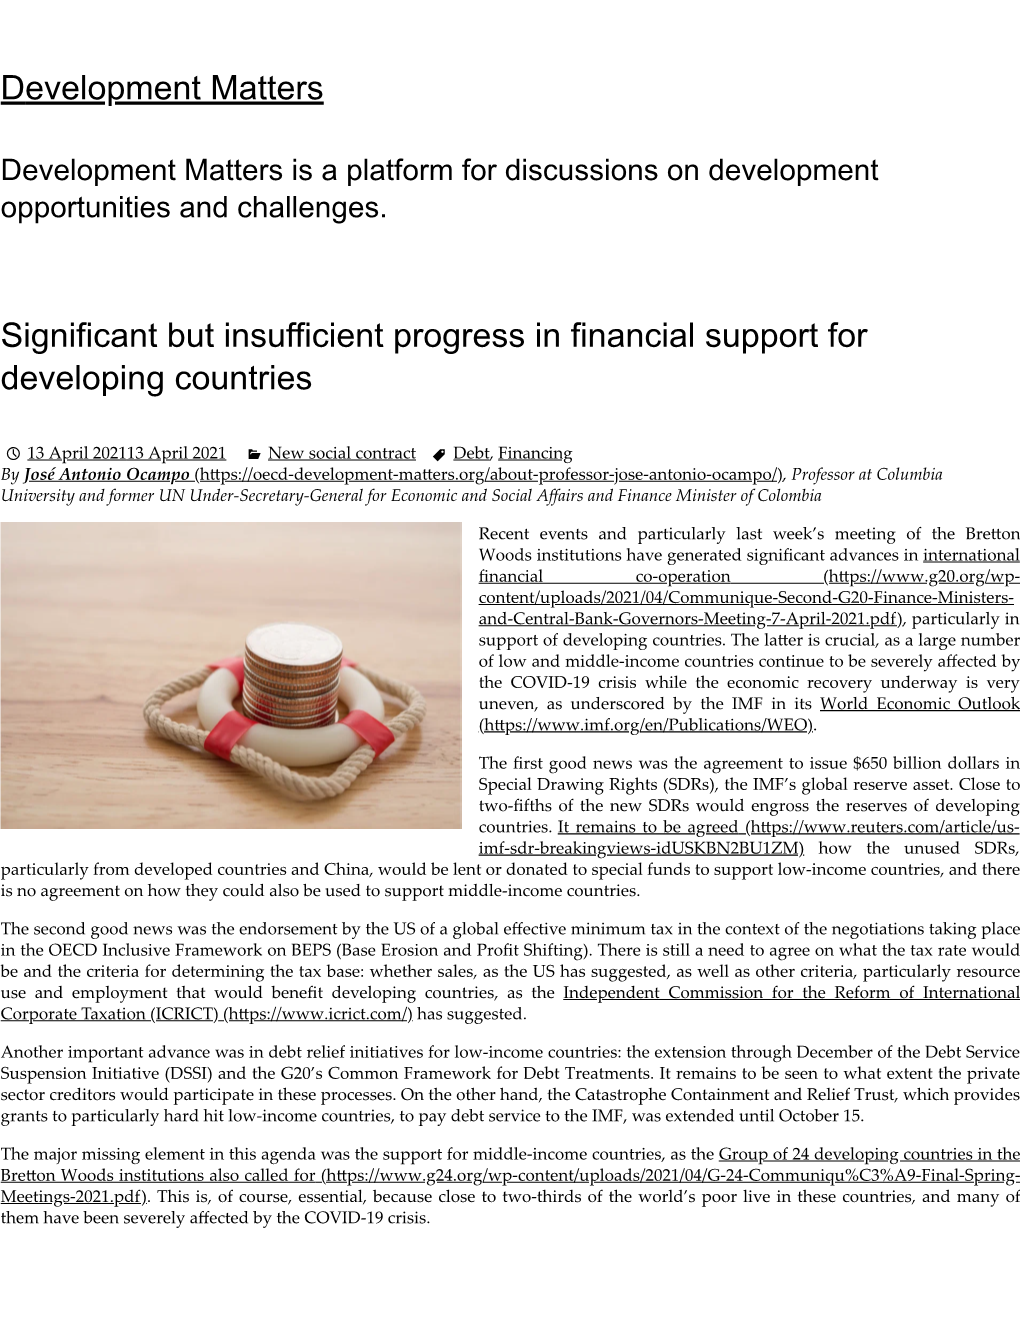 Significant but Insufficient Progress in Financial Support for Developing Countries